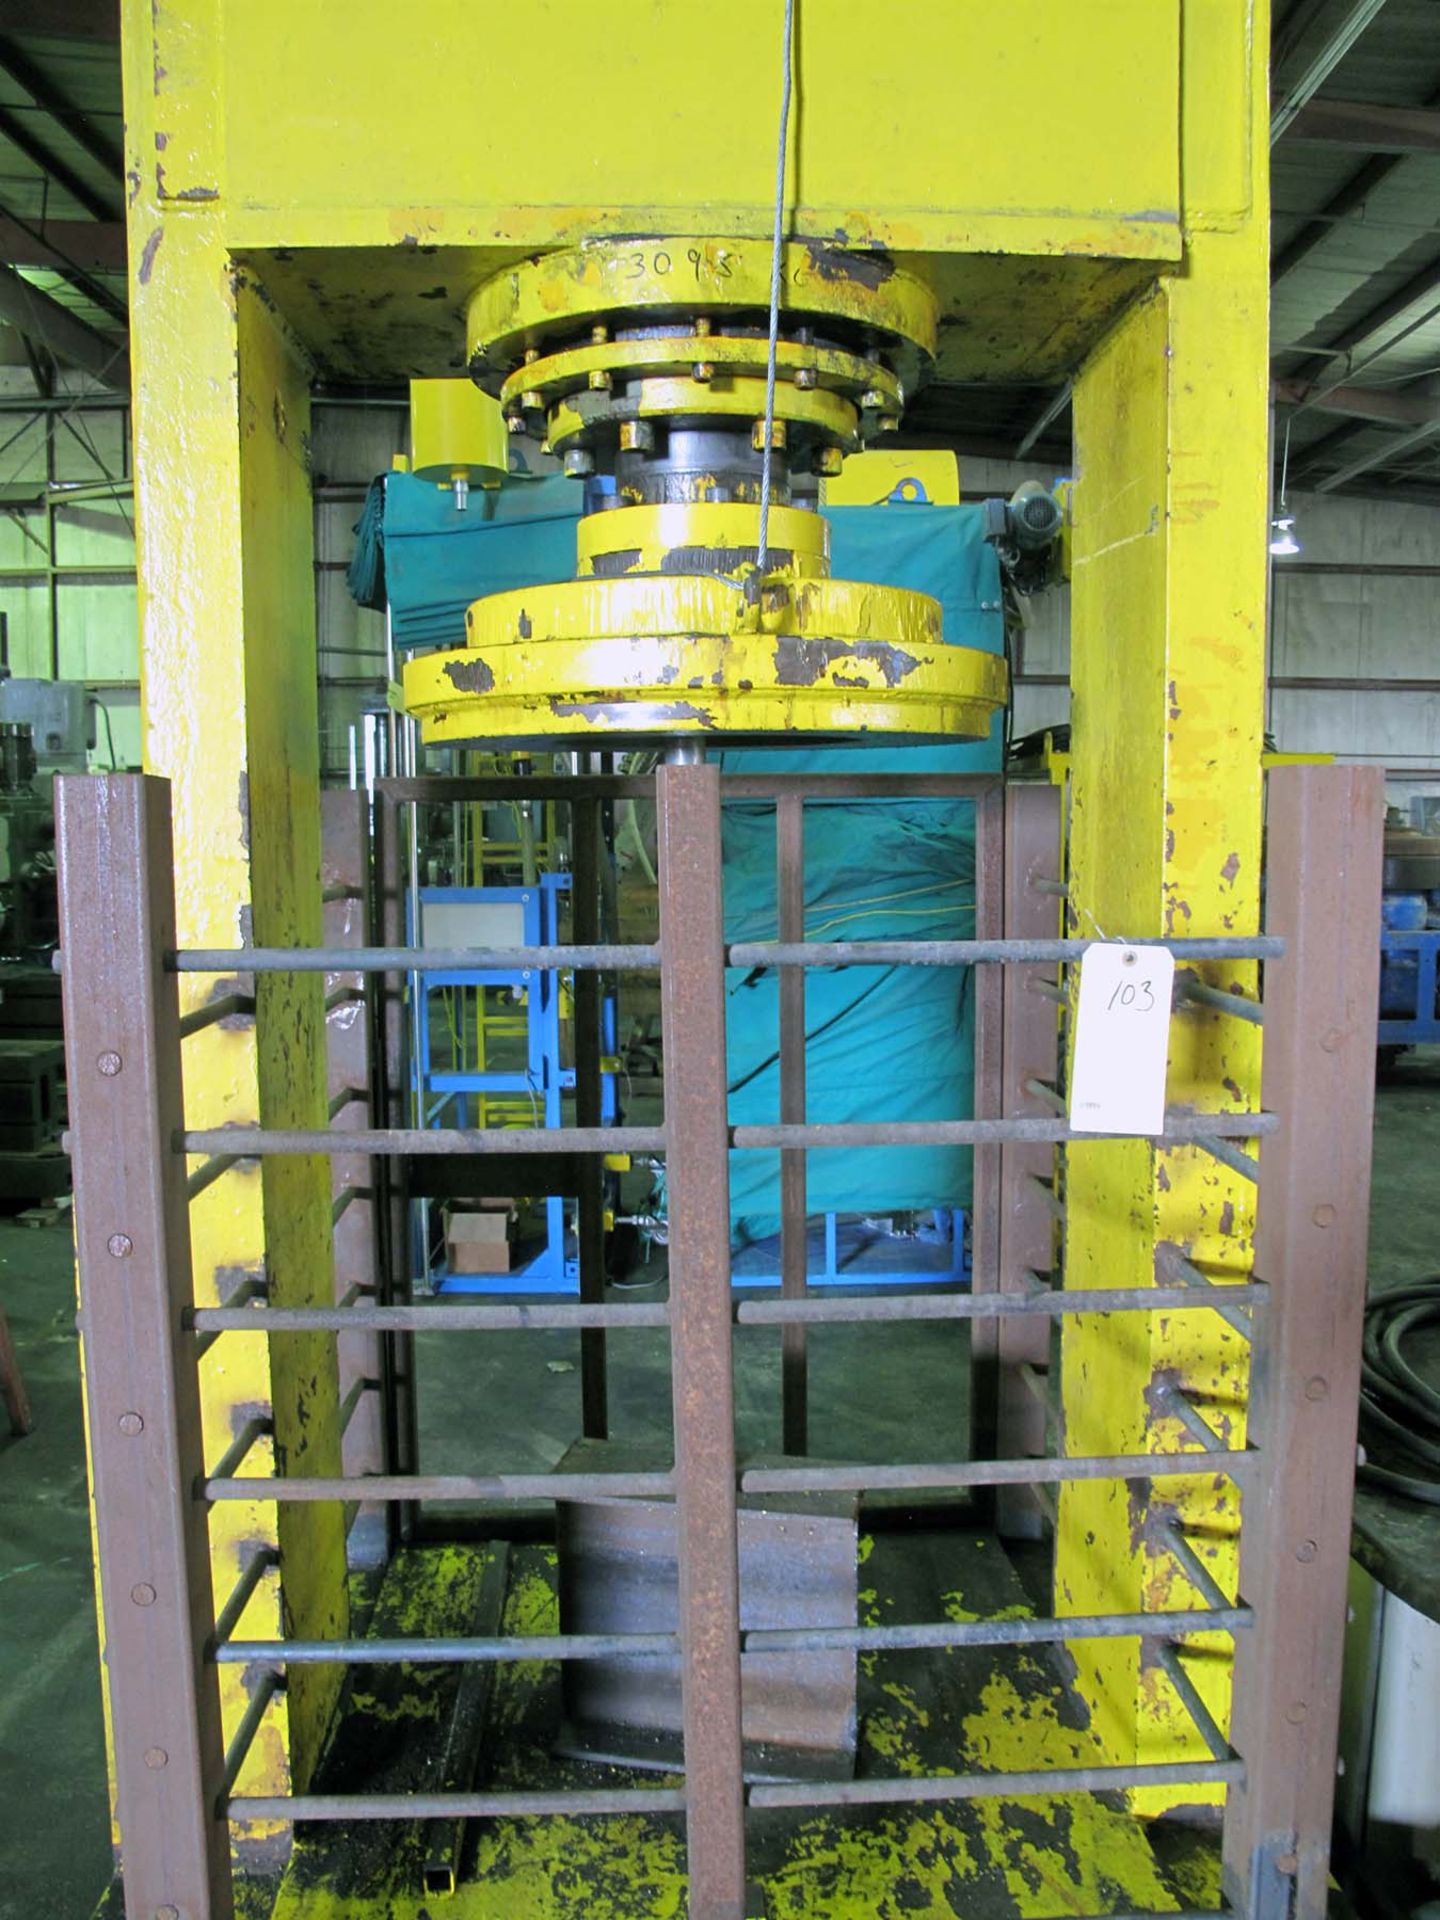 HYDRAULIC TIRE PRESS, CUSTOM 20 T. CAP. VERTICAL DESIGN, outboard hyd. pwr. pack, used to press - Image 3 of 5